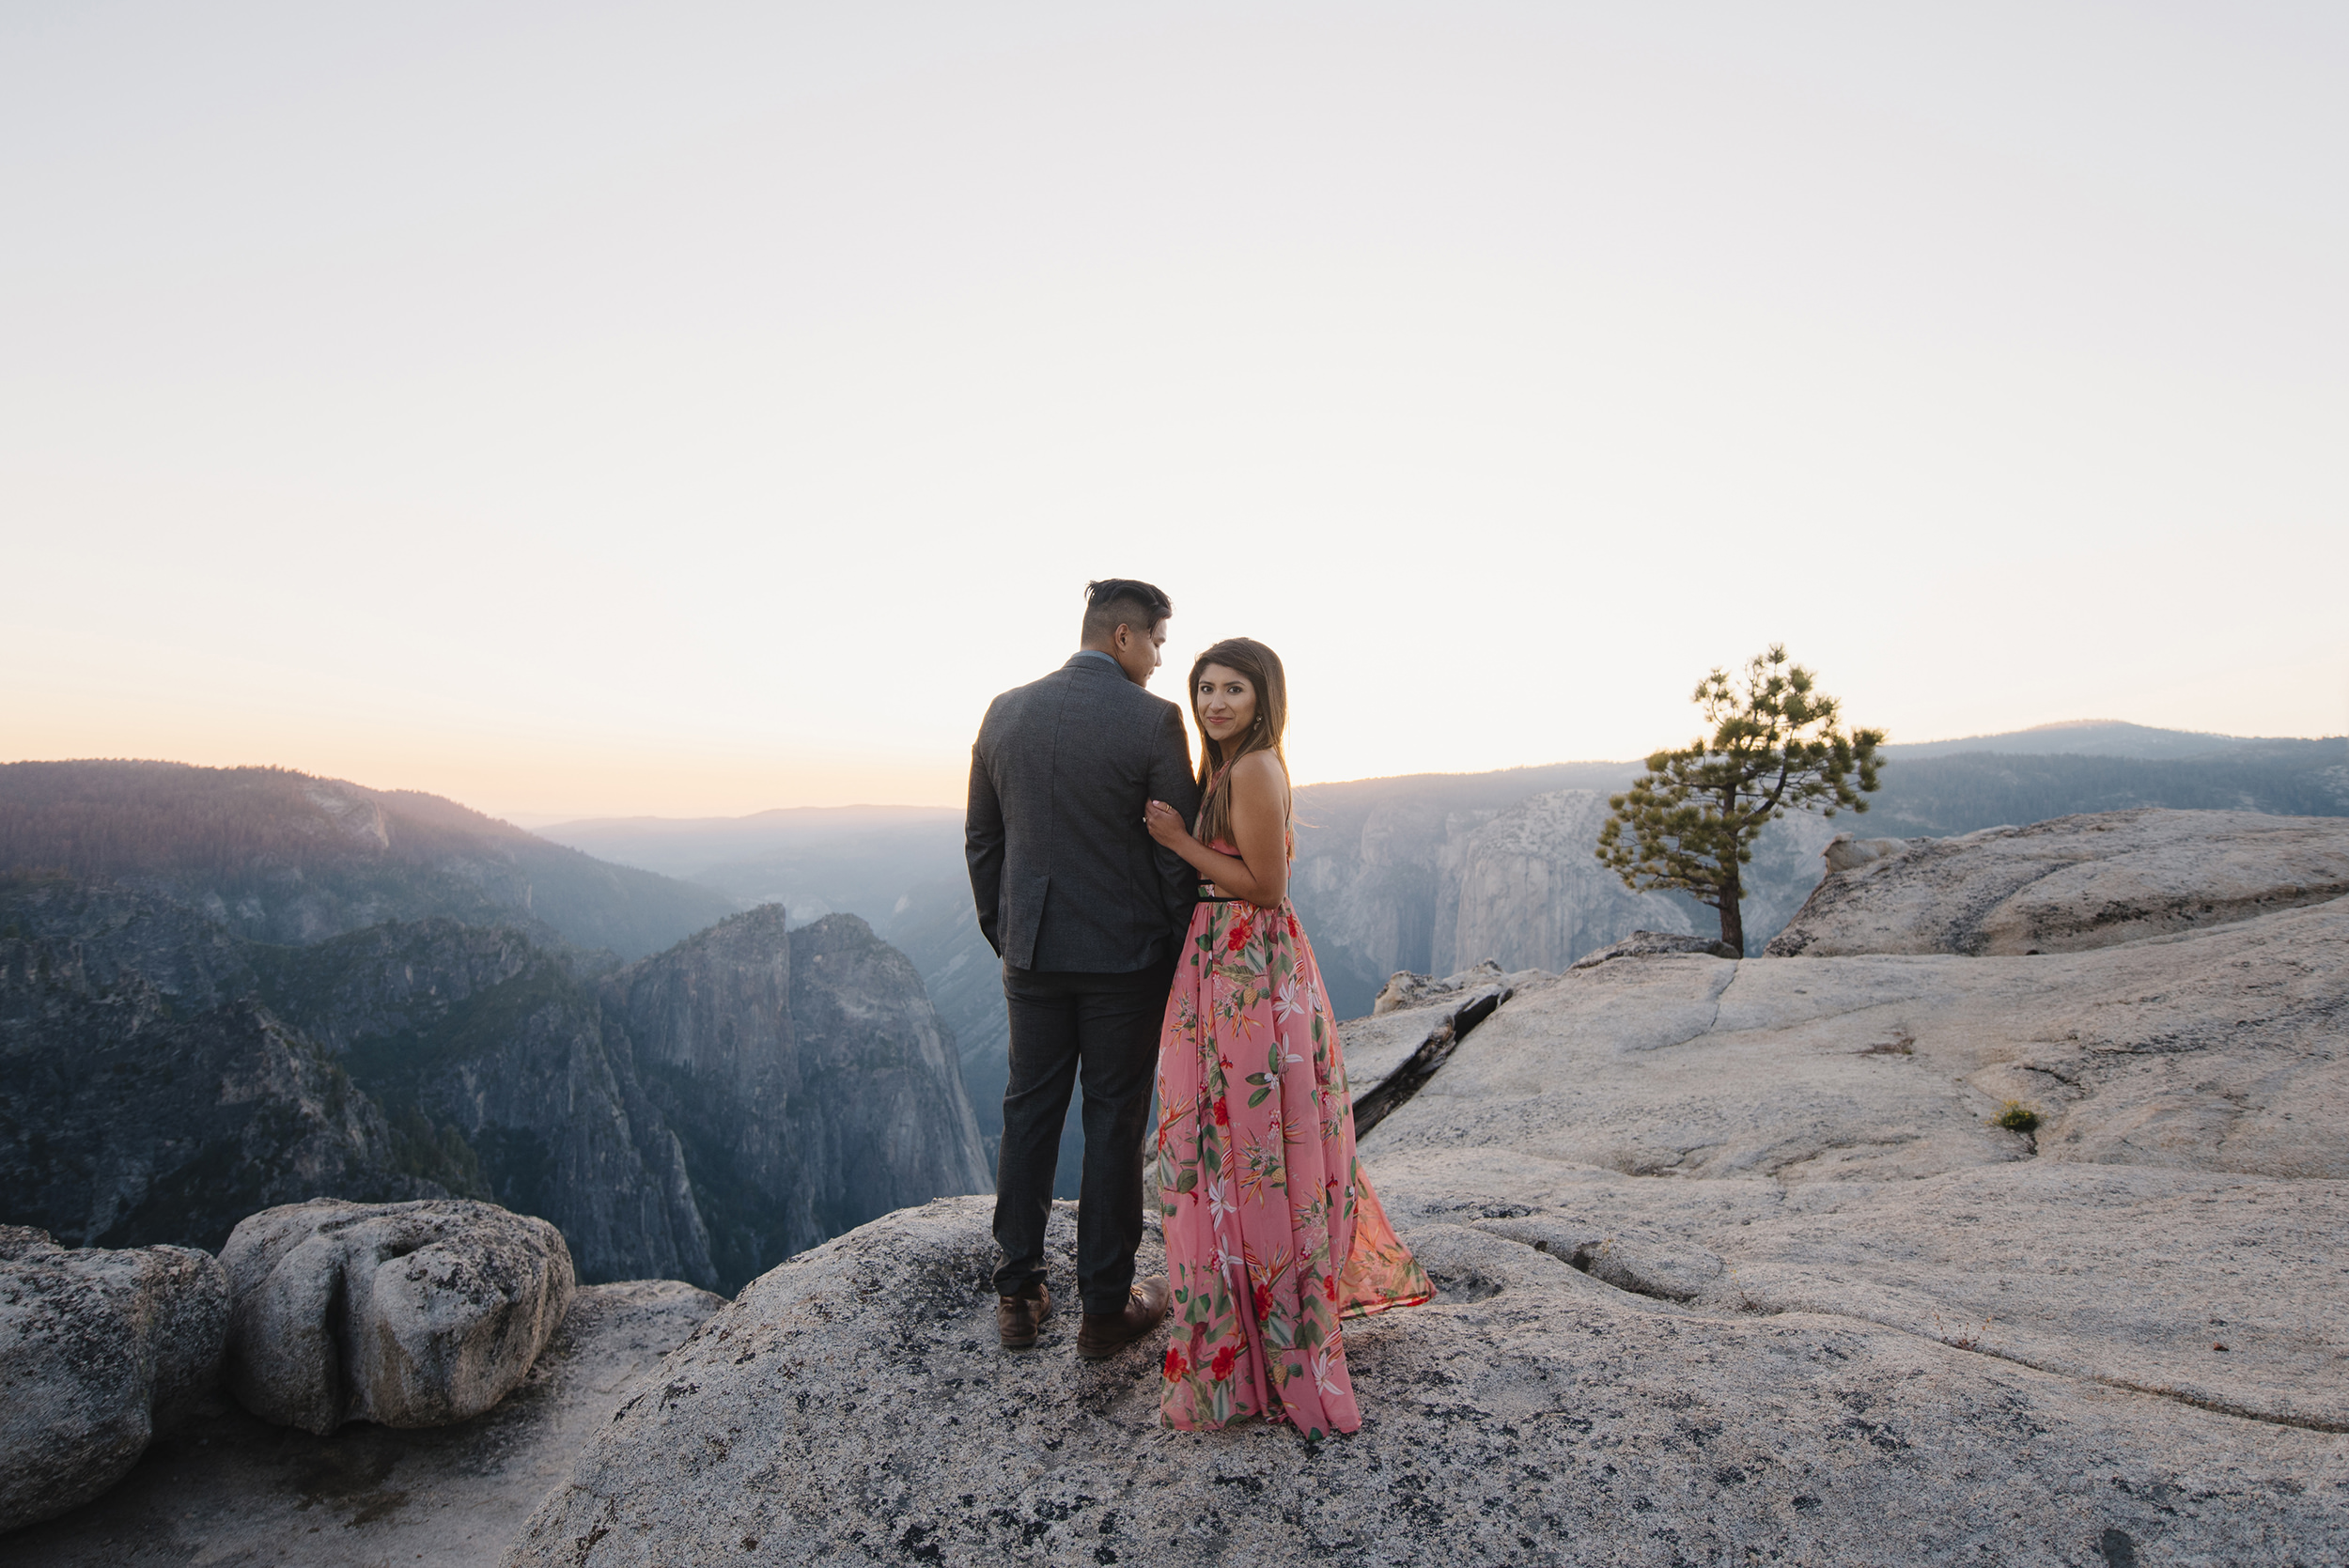 She glances back over her shoulder as they watch the sunset from Taft Point during engagement photography by Yosemite Wedding Photographers Colby and Jess colbyandjess.com